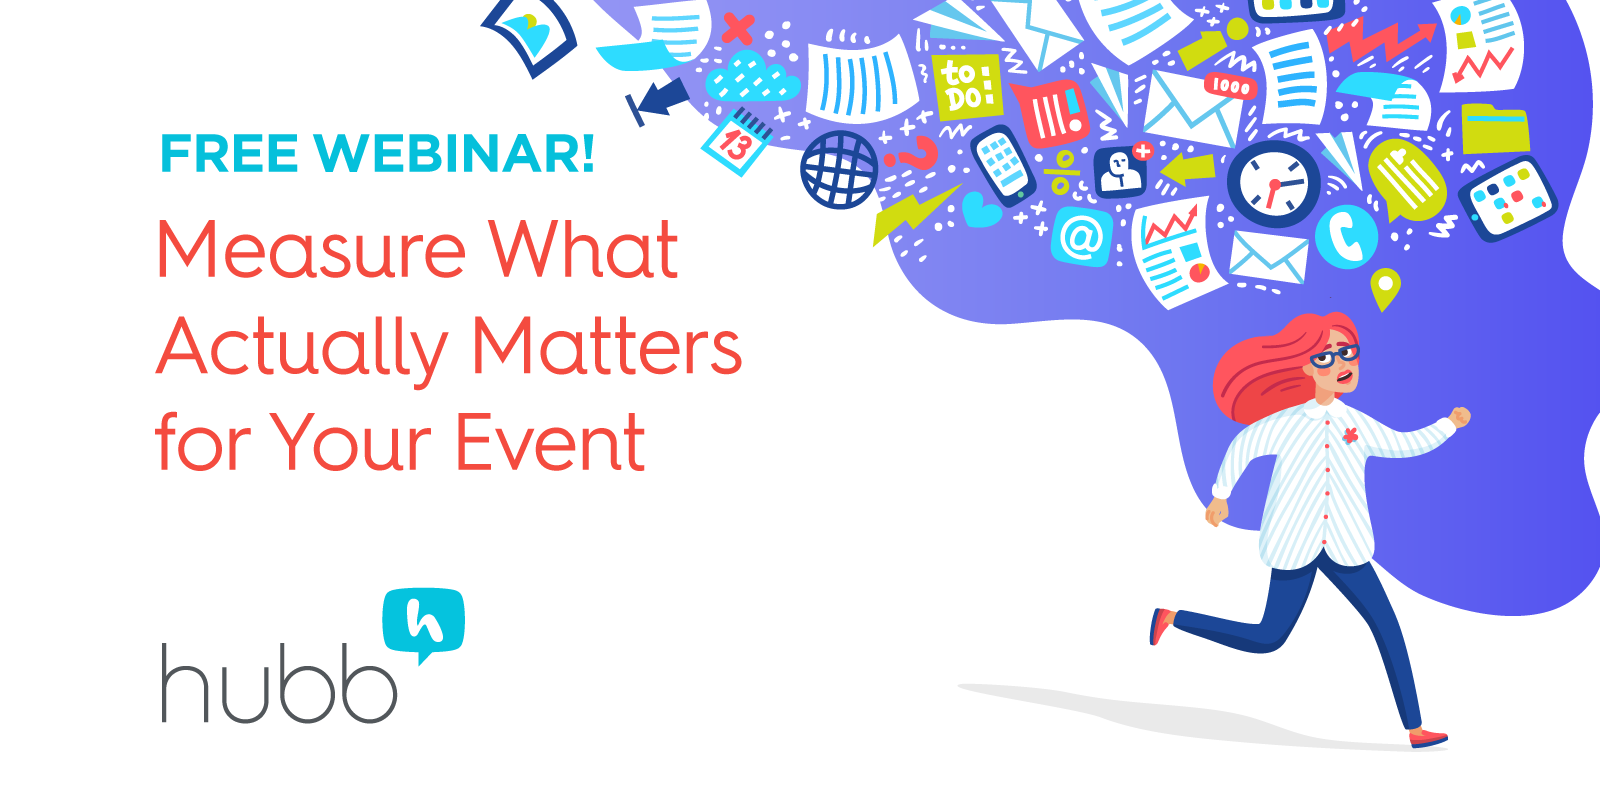 [Webinar] Measure What Data Actually Matters for Your Event